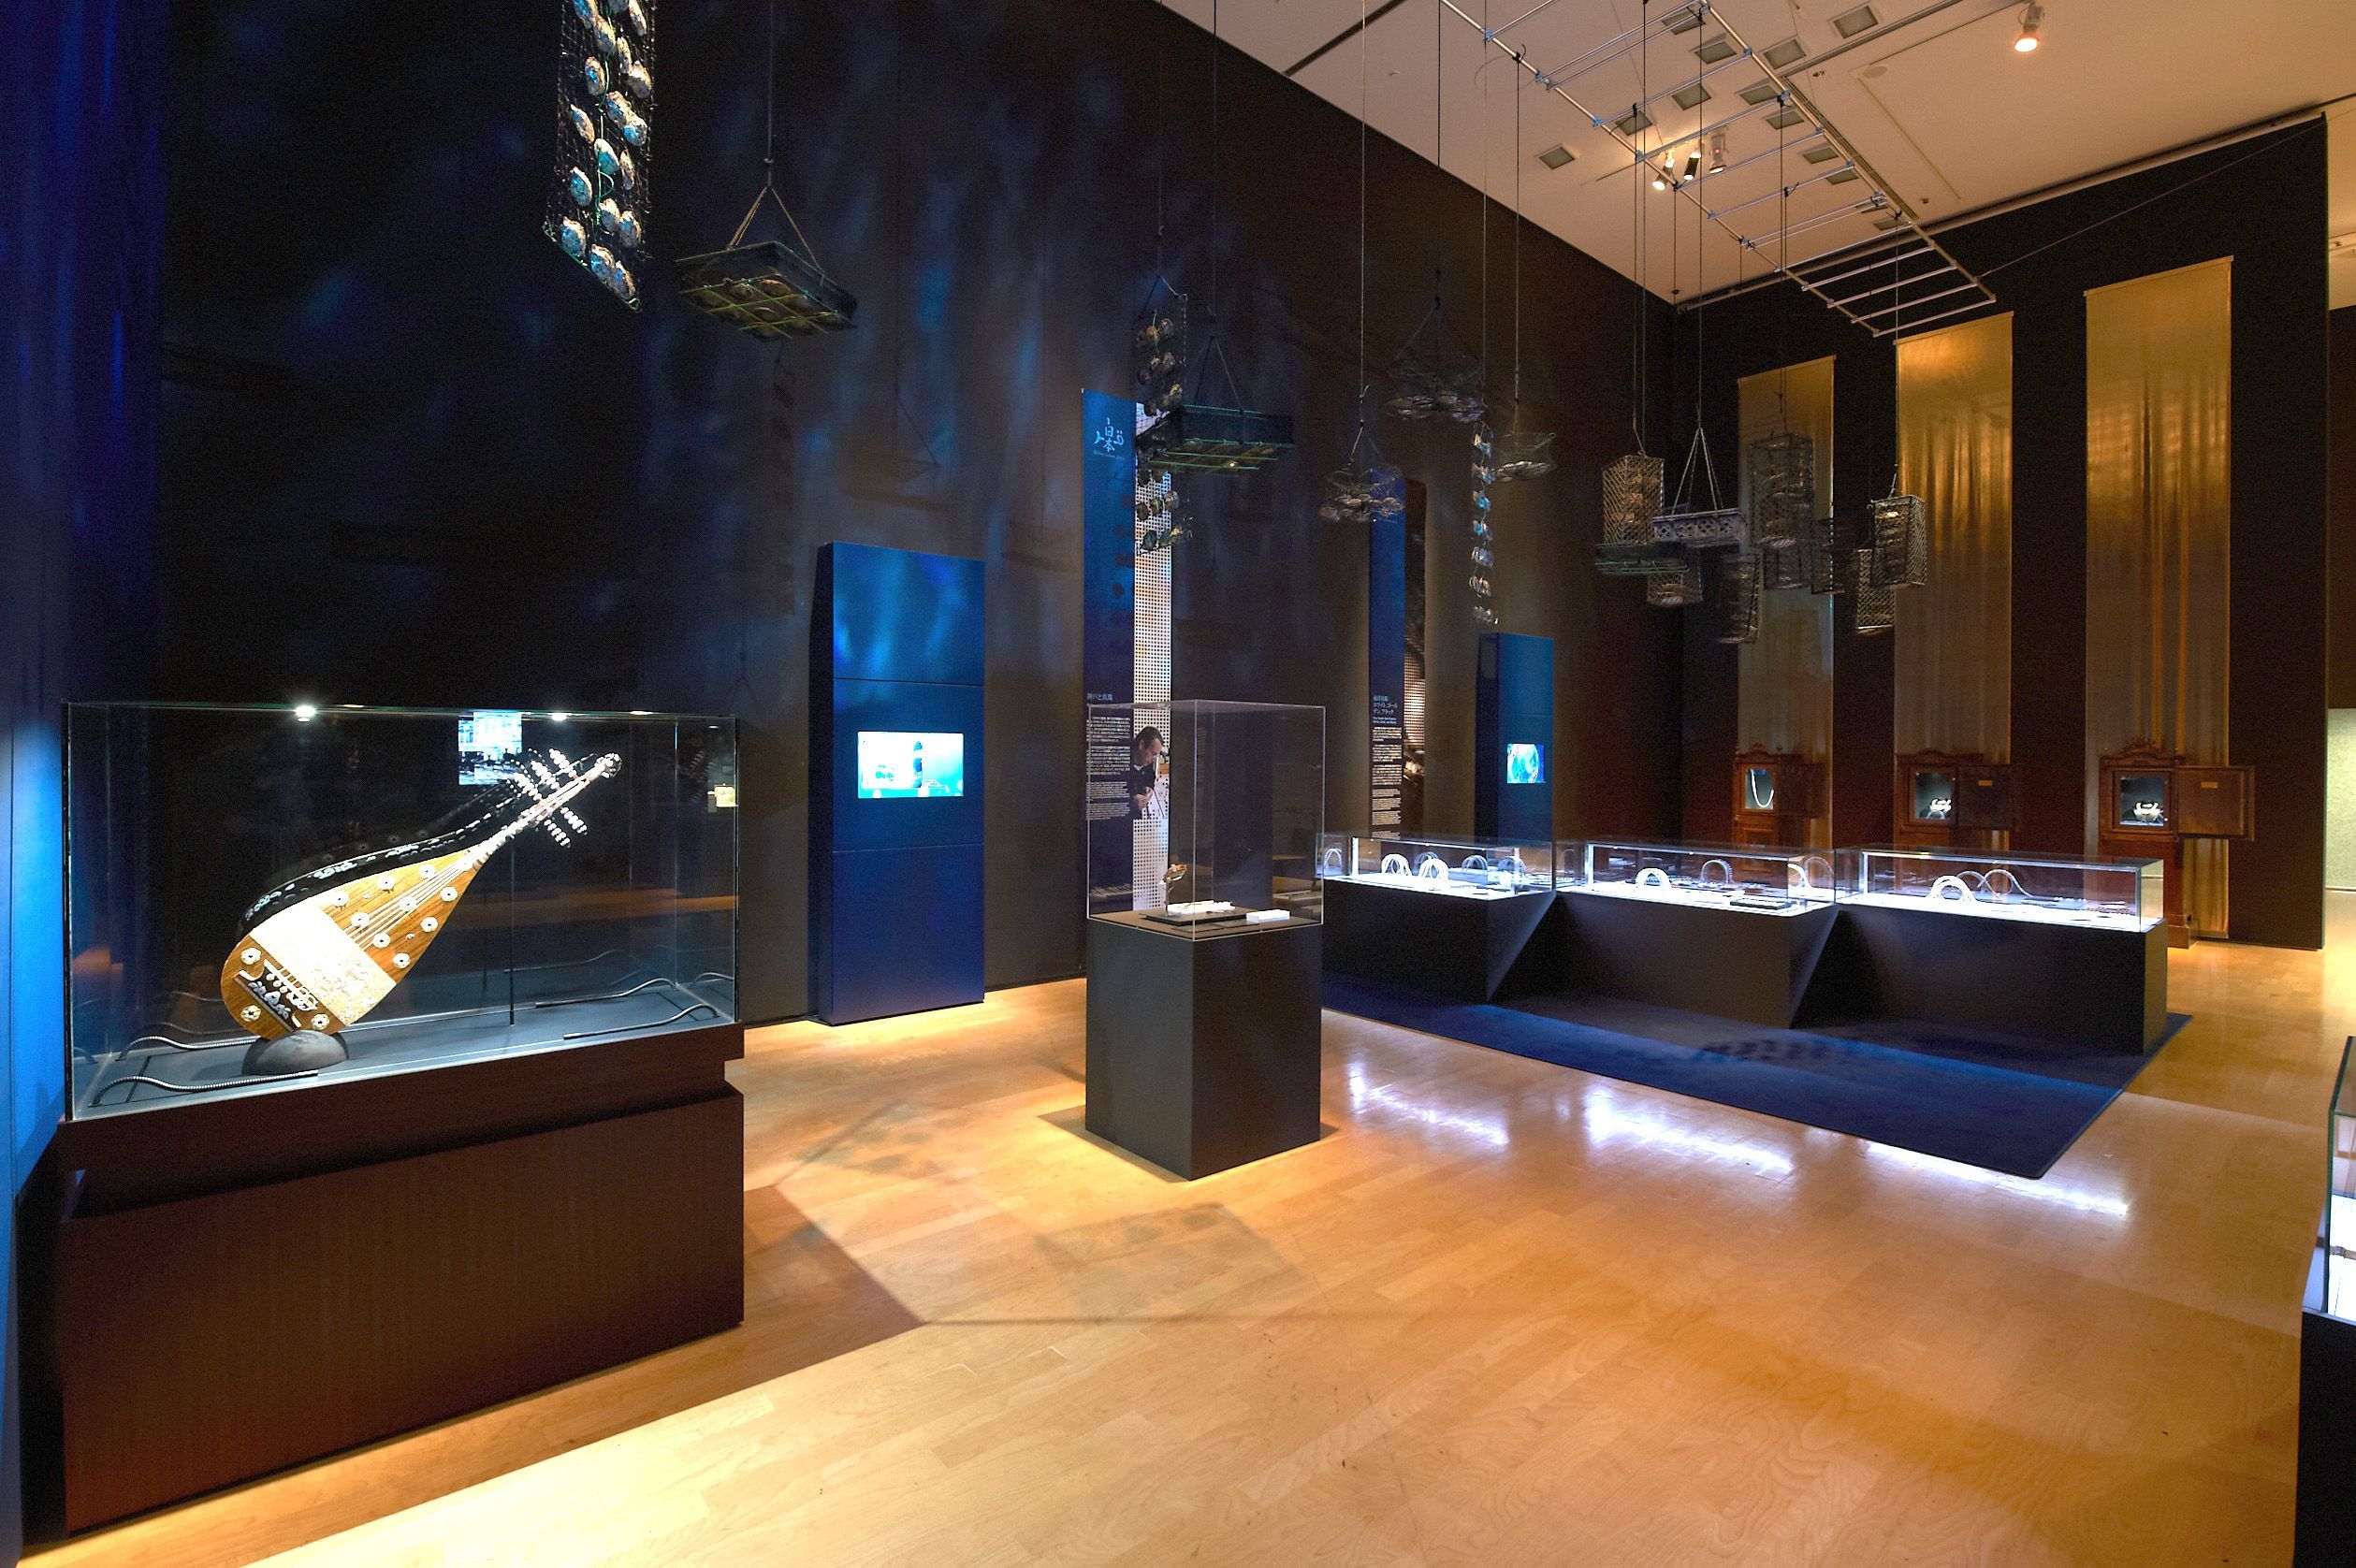 Museum space from the Qatari exhibition Pearls: Jewels from the Sea in Kobe, Japan.